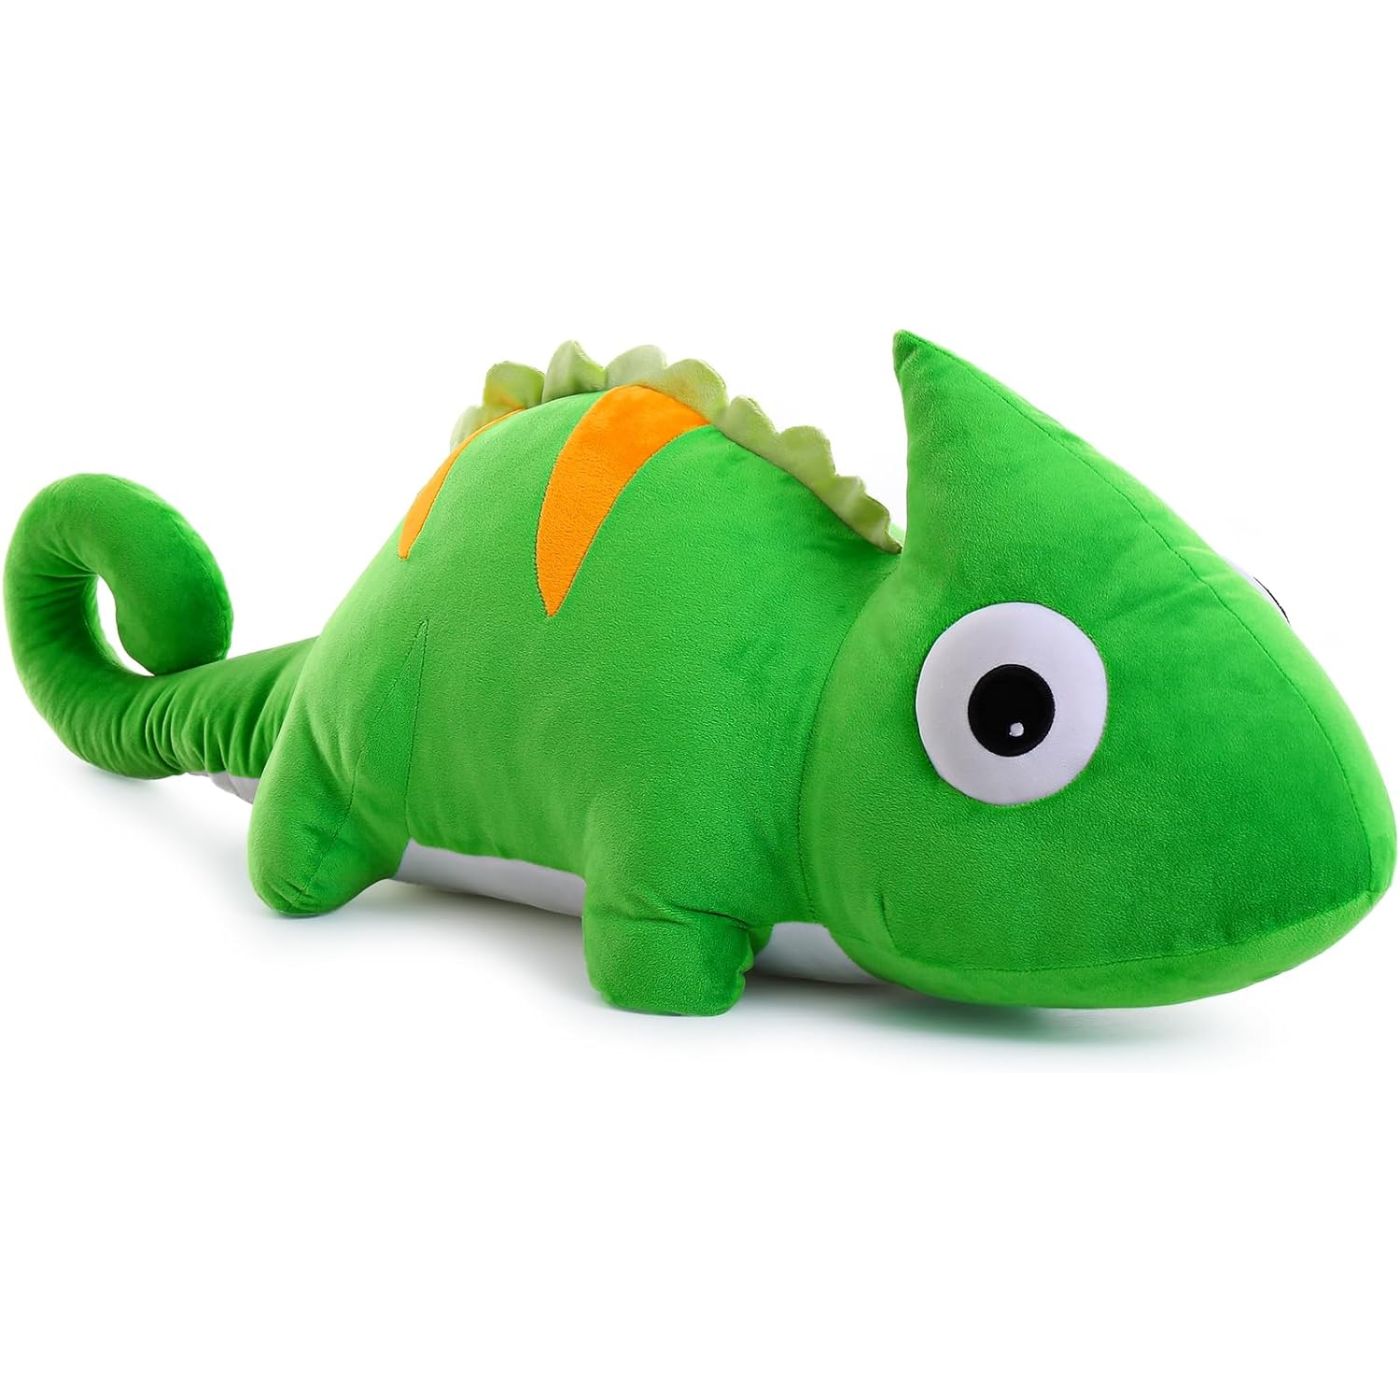 Giant Chameleon Stuffed Toy, 39 Inches